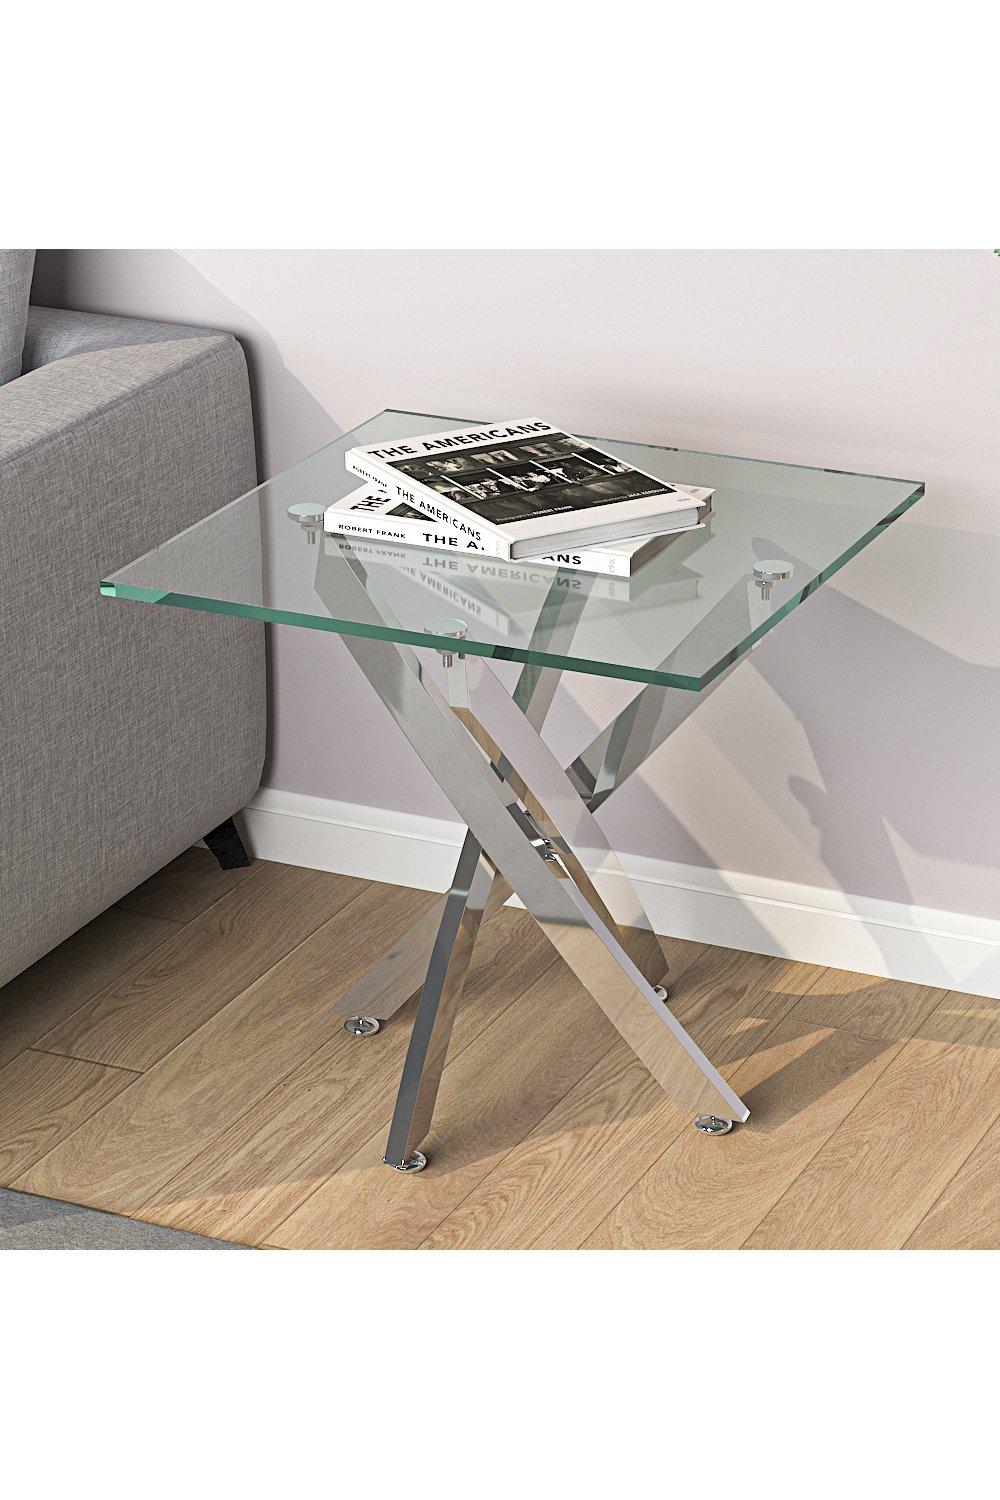 Modern Square Tempered Glass Top Coffee End Table with Chrome Cross Leg